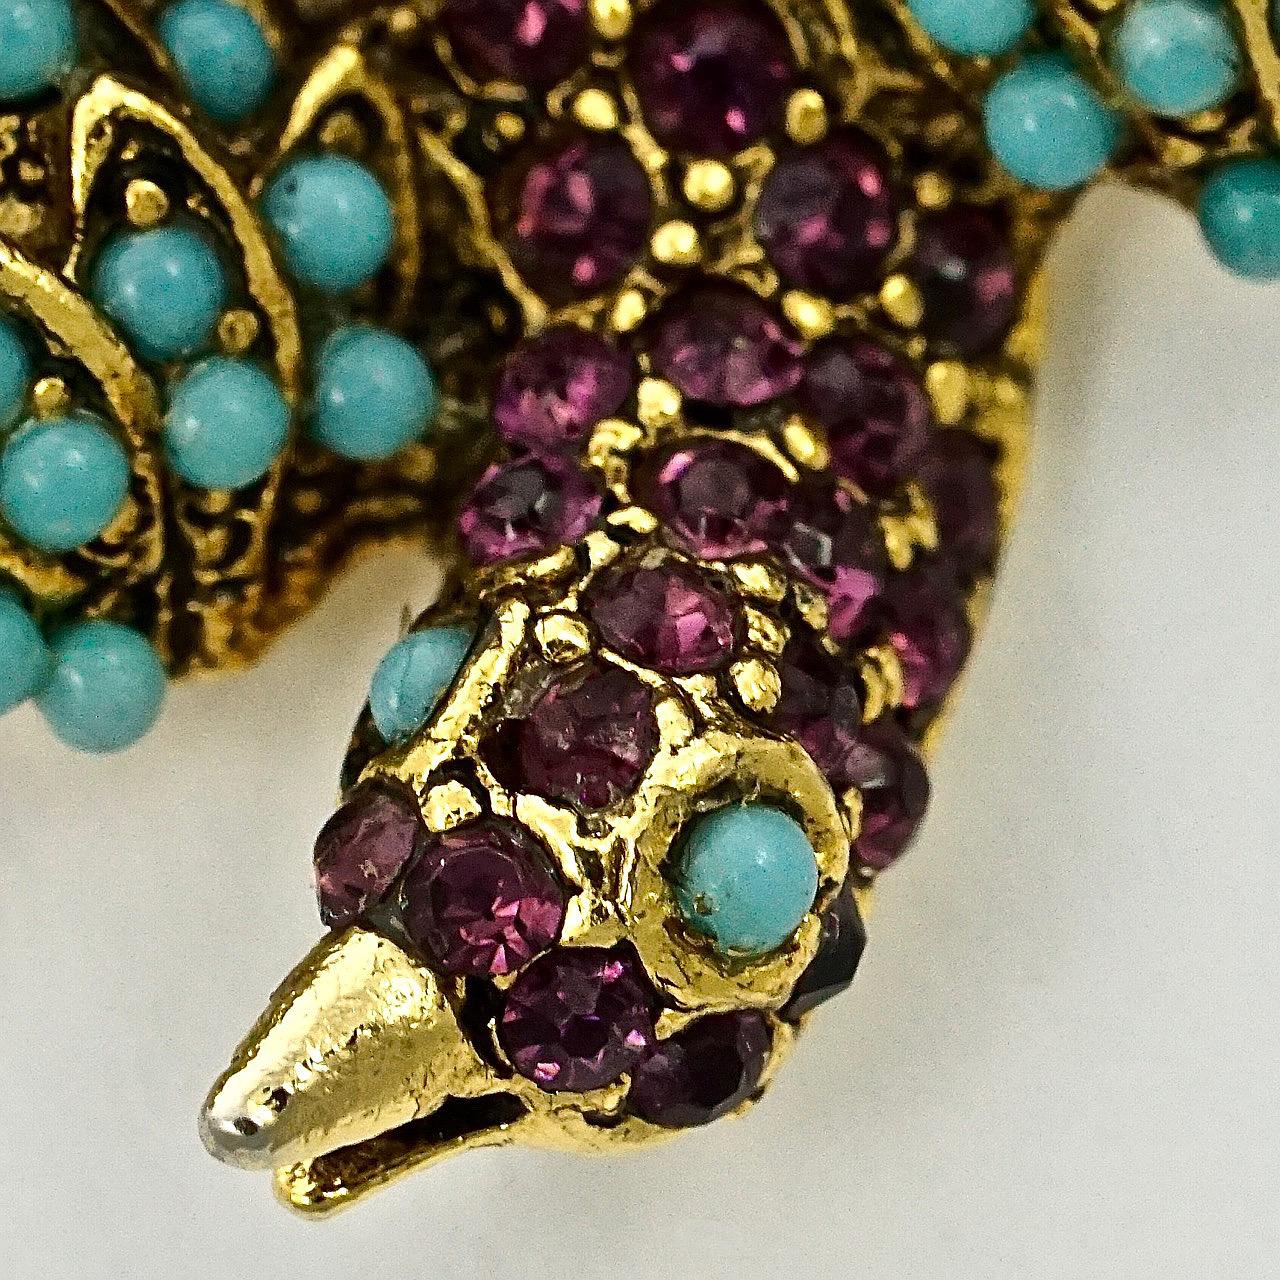 Pauline Rader beautiful gold plated bird brooch, set with amethyst rhinestone and turquoise glass stones. Measuring length 4.7 cm / 1.85 inches by width 2.9 cm / 1.14 inches. 

This very lovely vintage brooch by Pauline Rader is circa 1960s. A rare